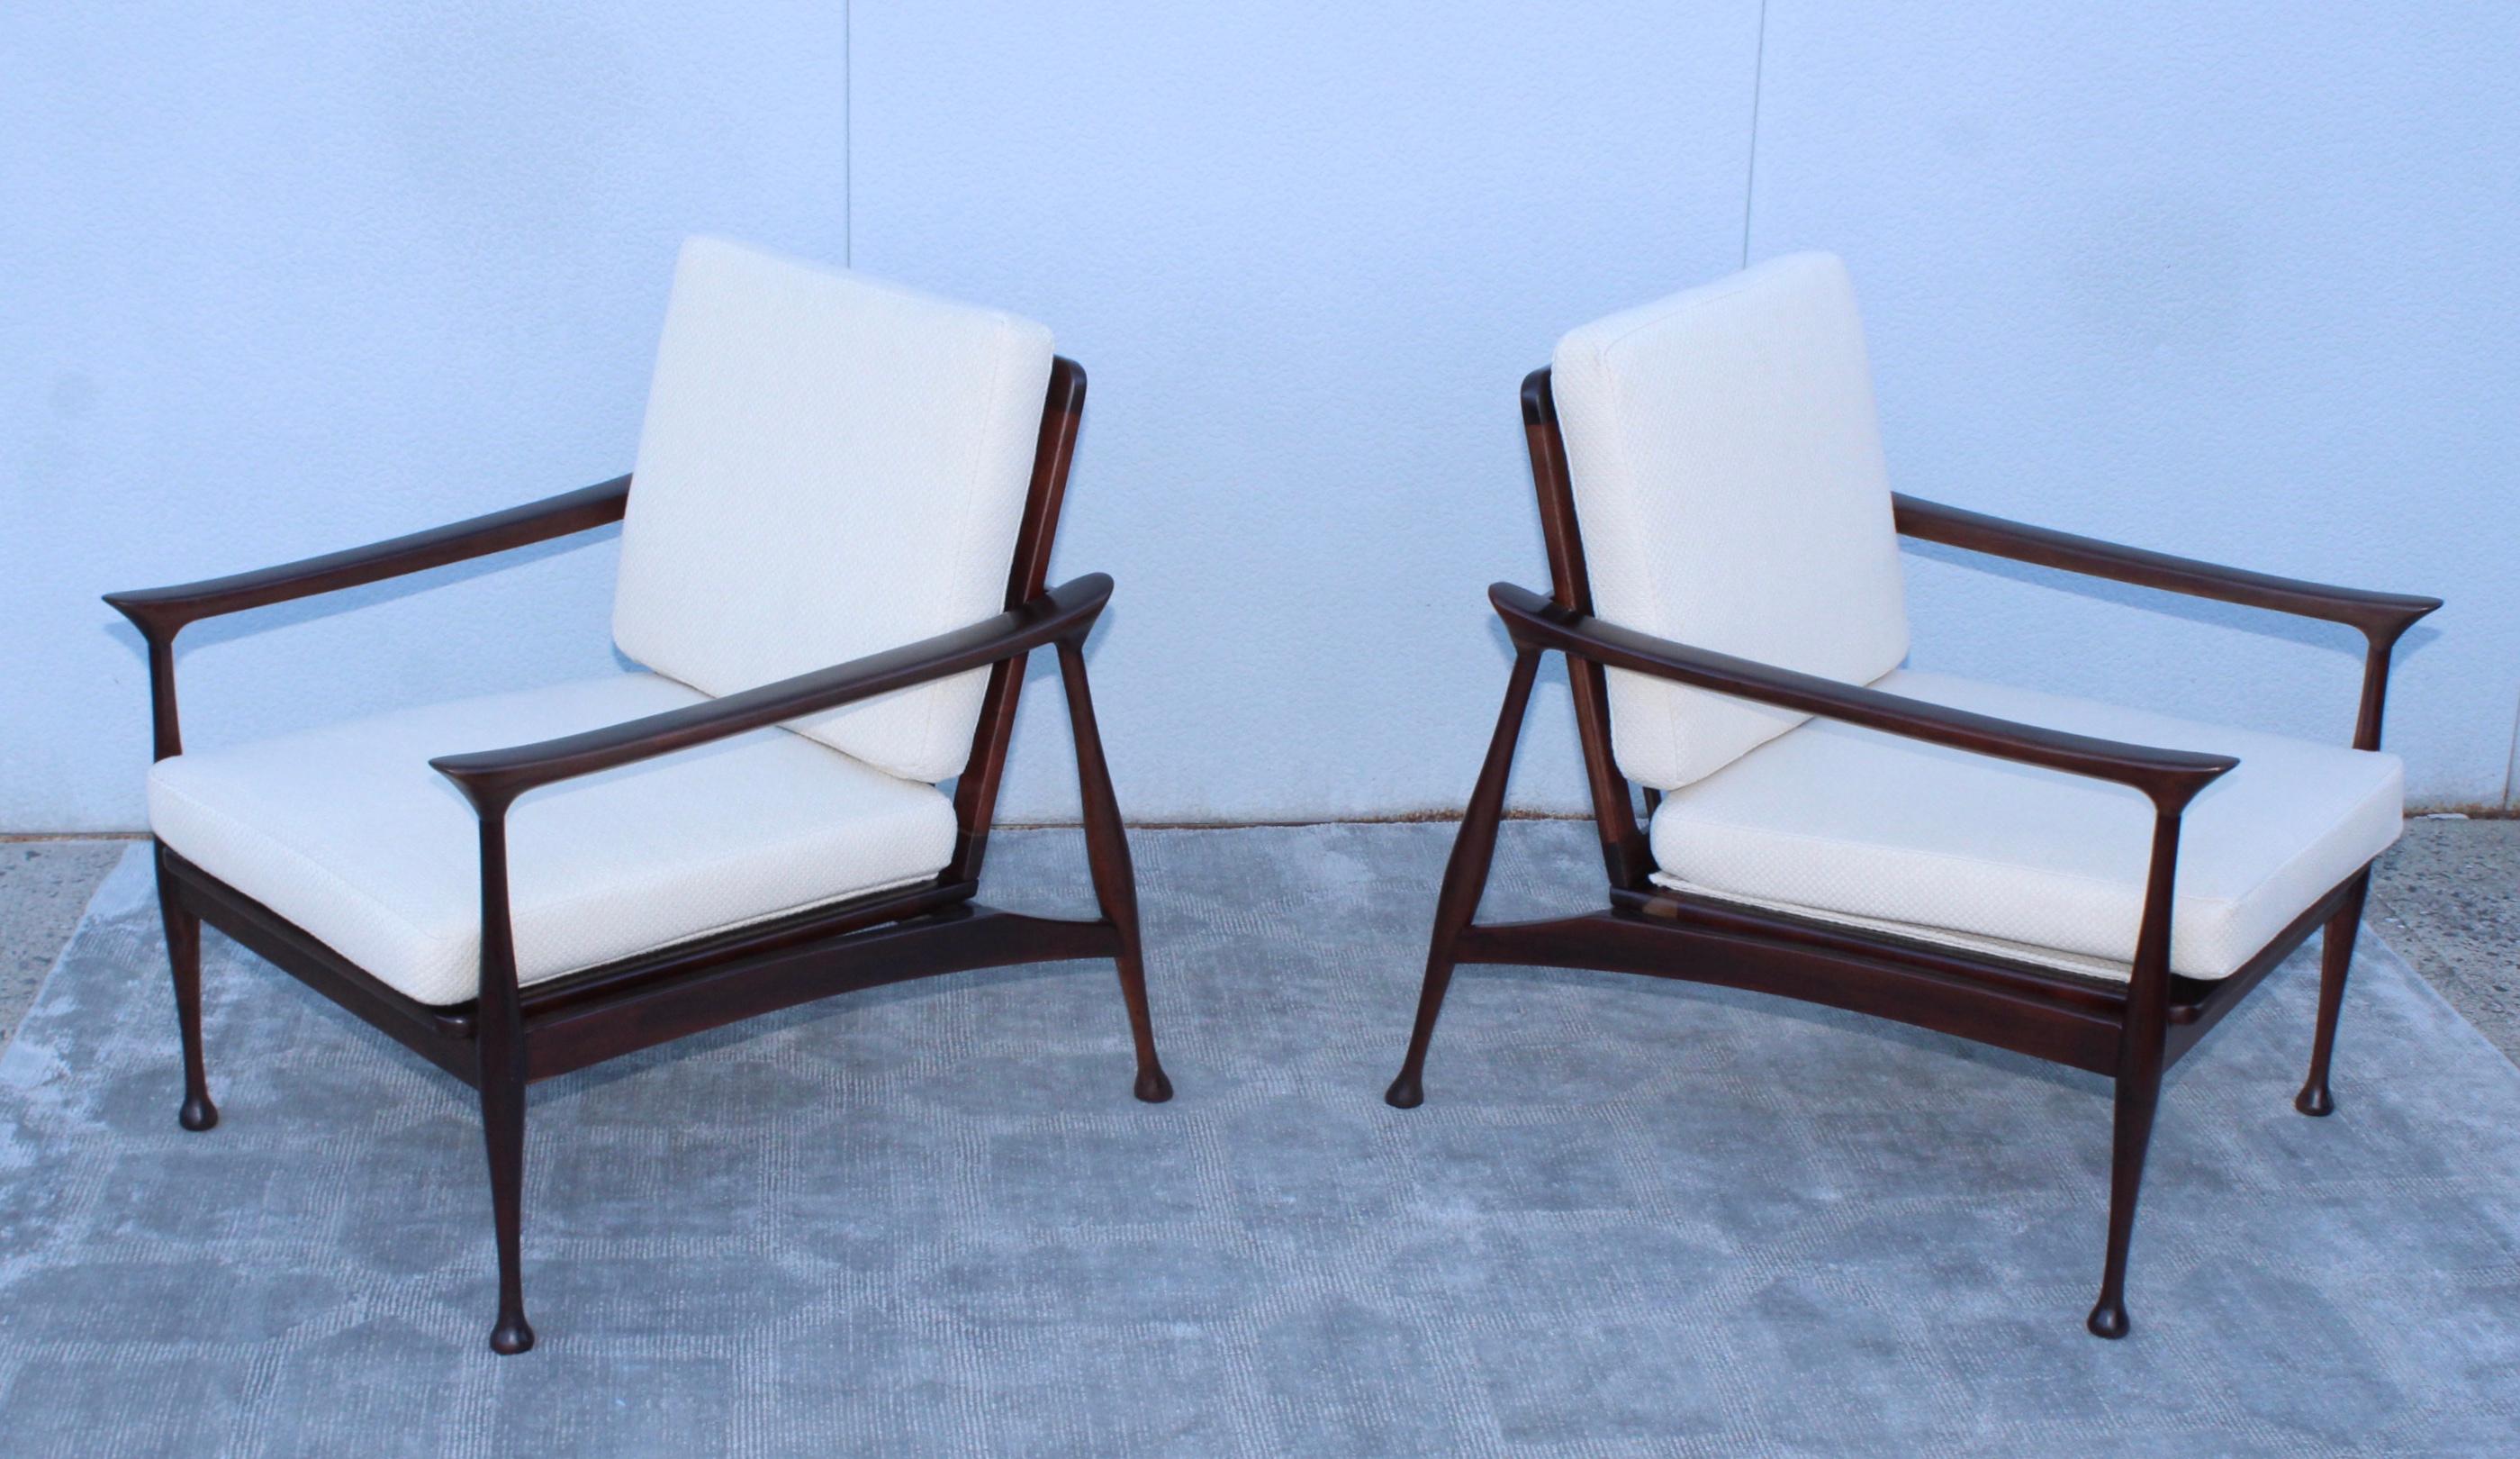 Stunning pair of 1950s Mid-Century Modern Italian walnut lounge chairs attributed to Fratelli Reguitti, lightly restored with new off-white upholstery, with some wear and patina to the wood minor repairs.